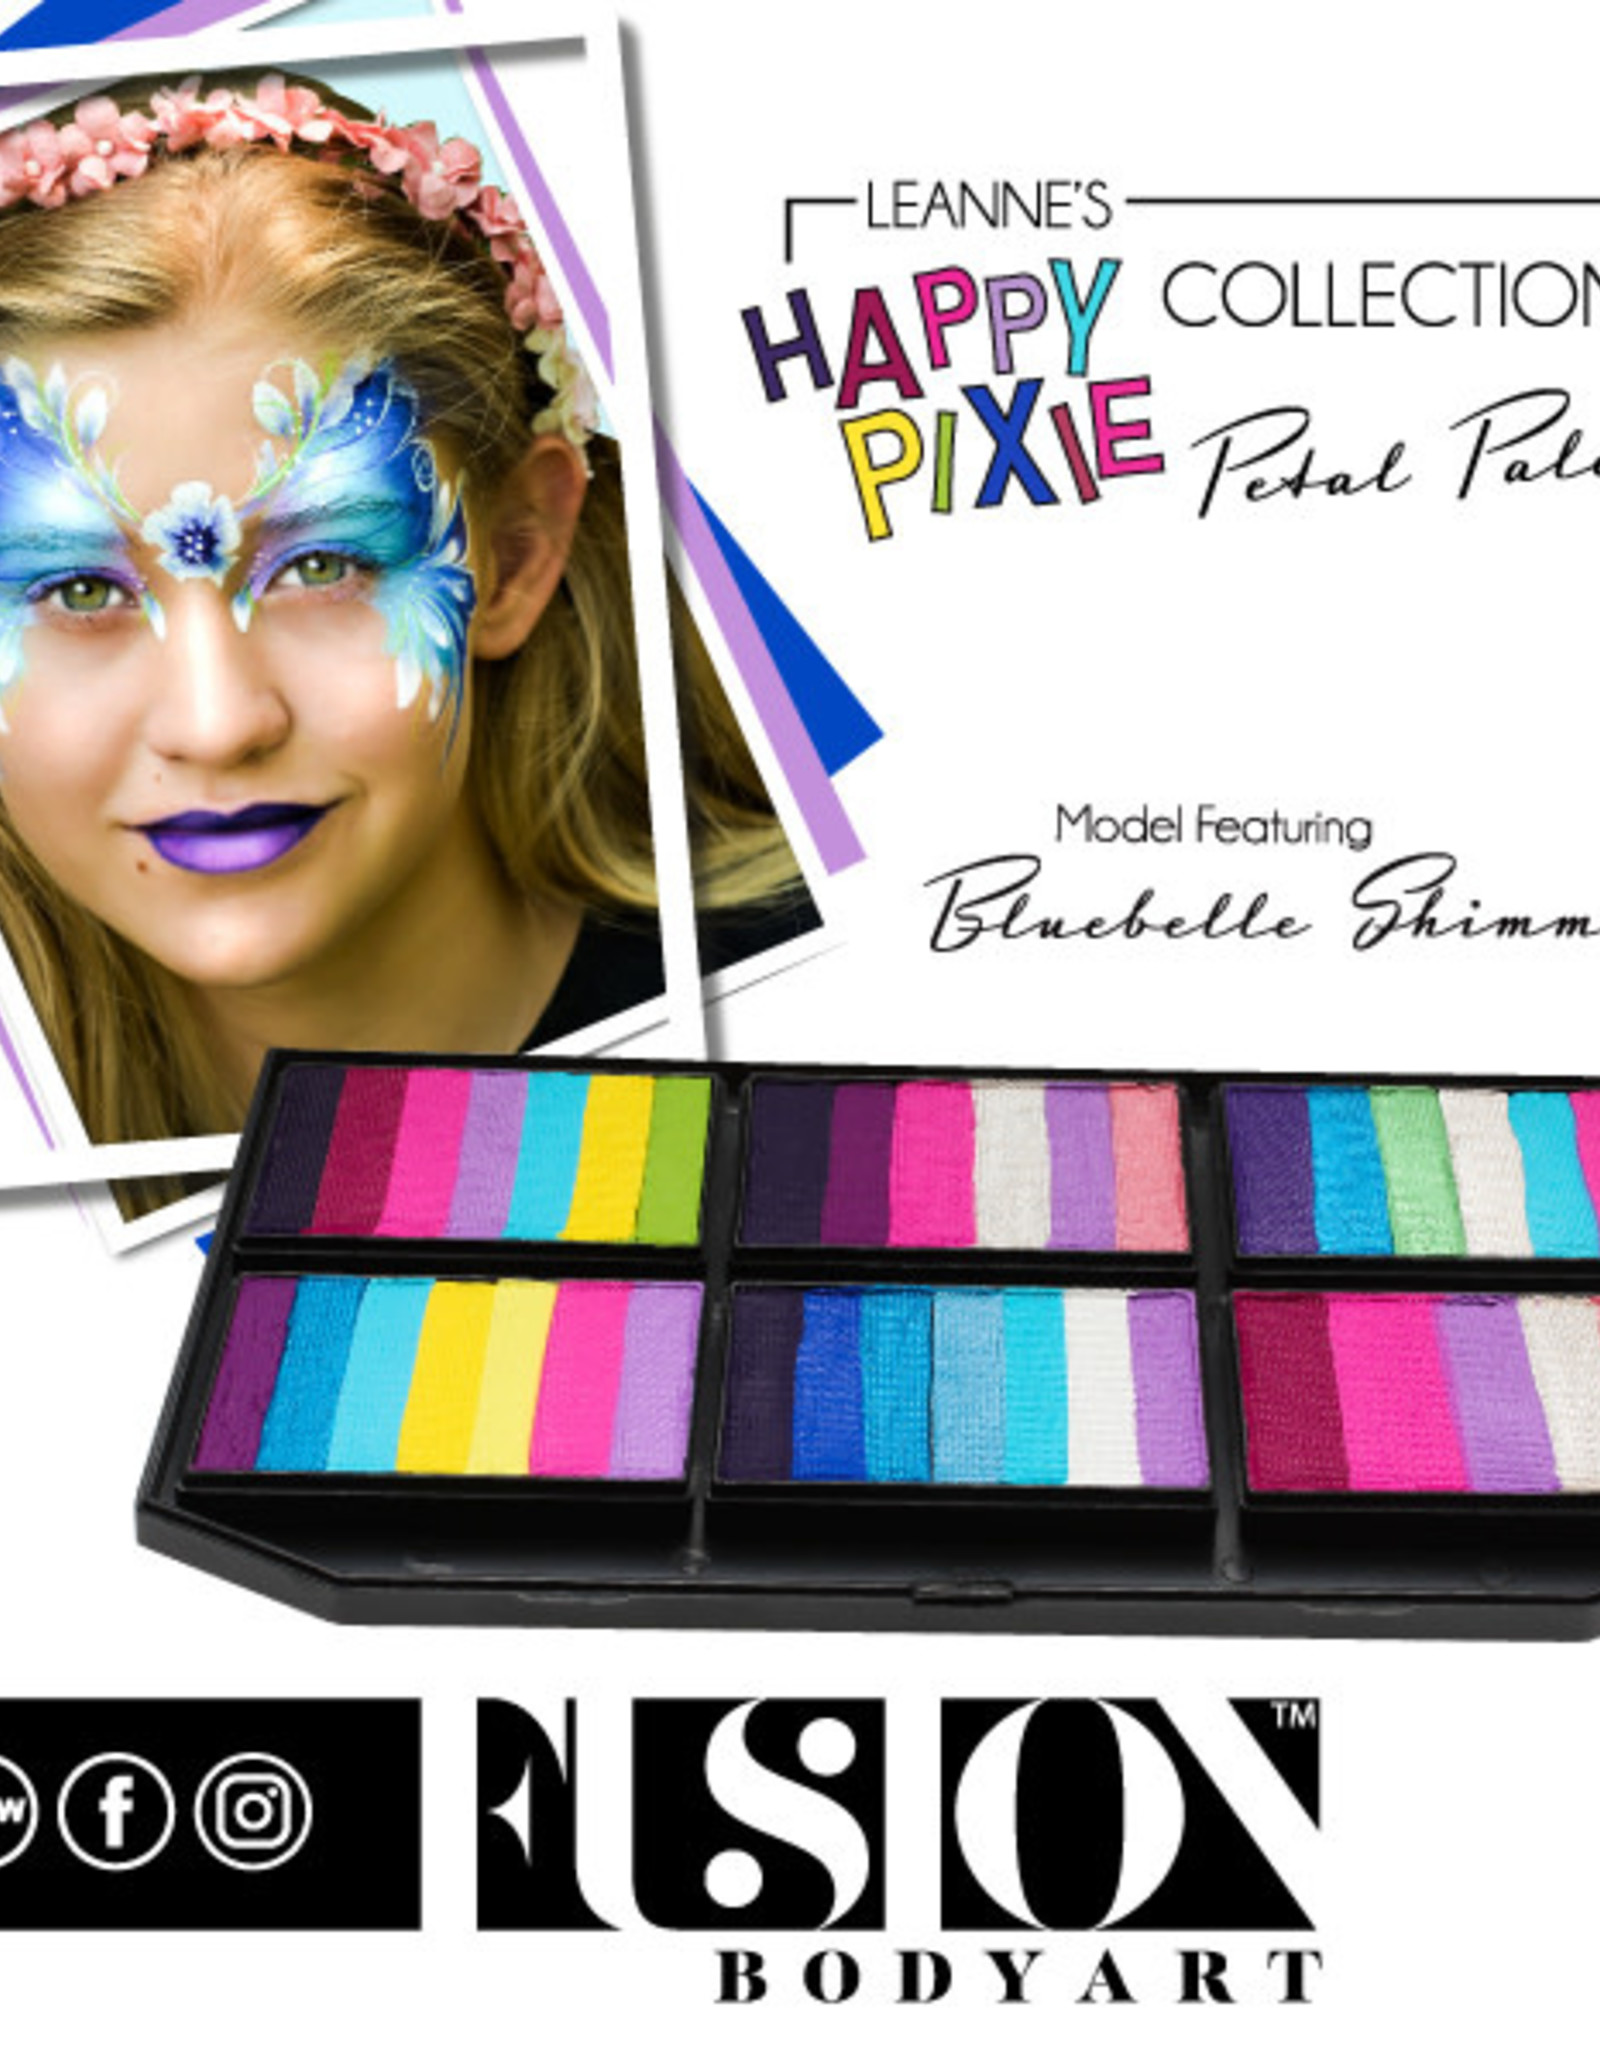 Fusion Fusion Refill Bluebelle Shimmer 25g